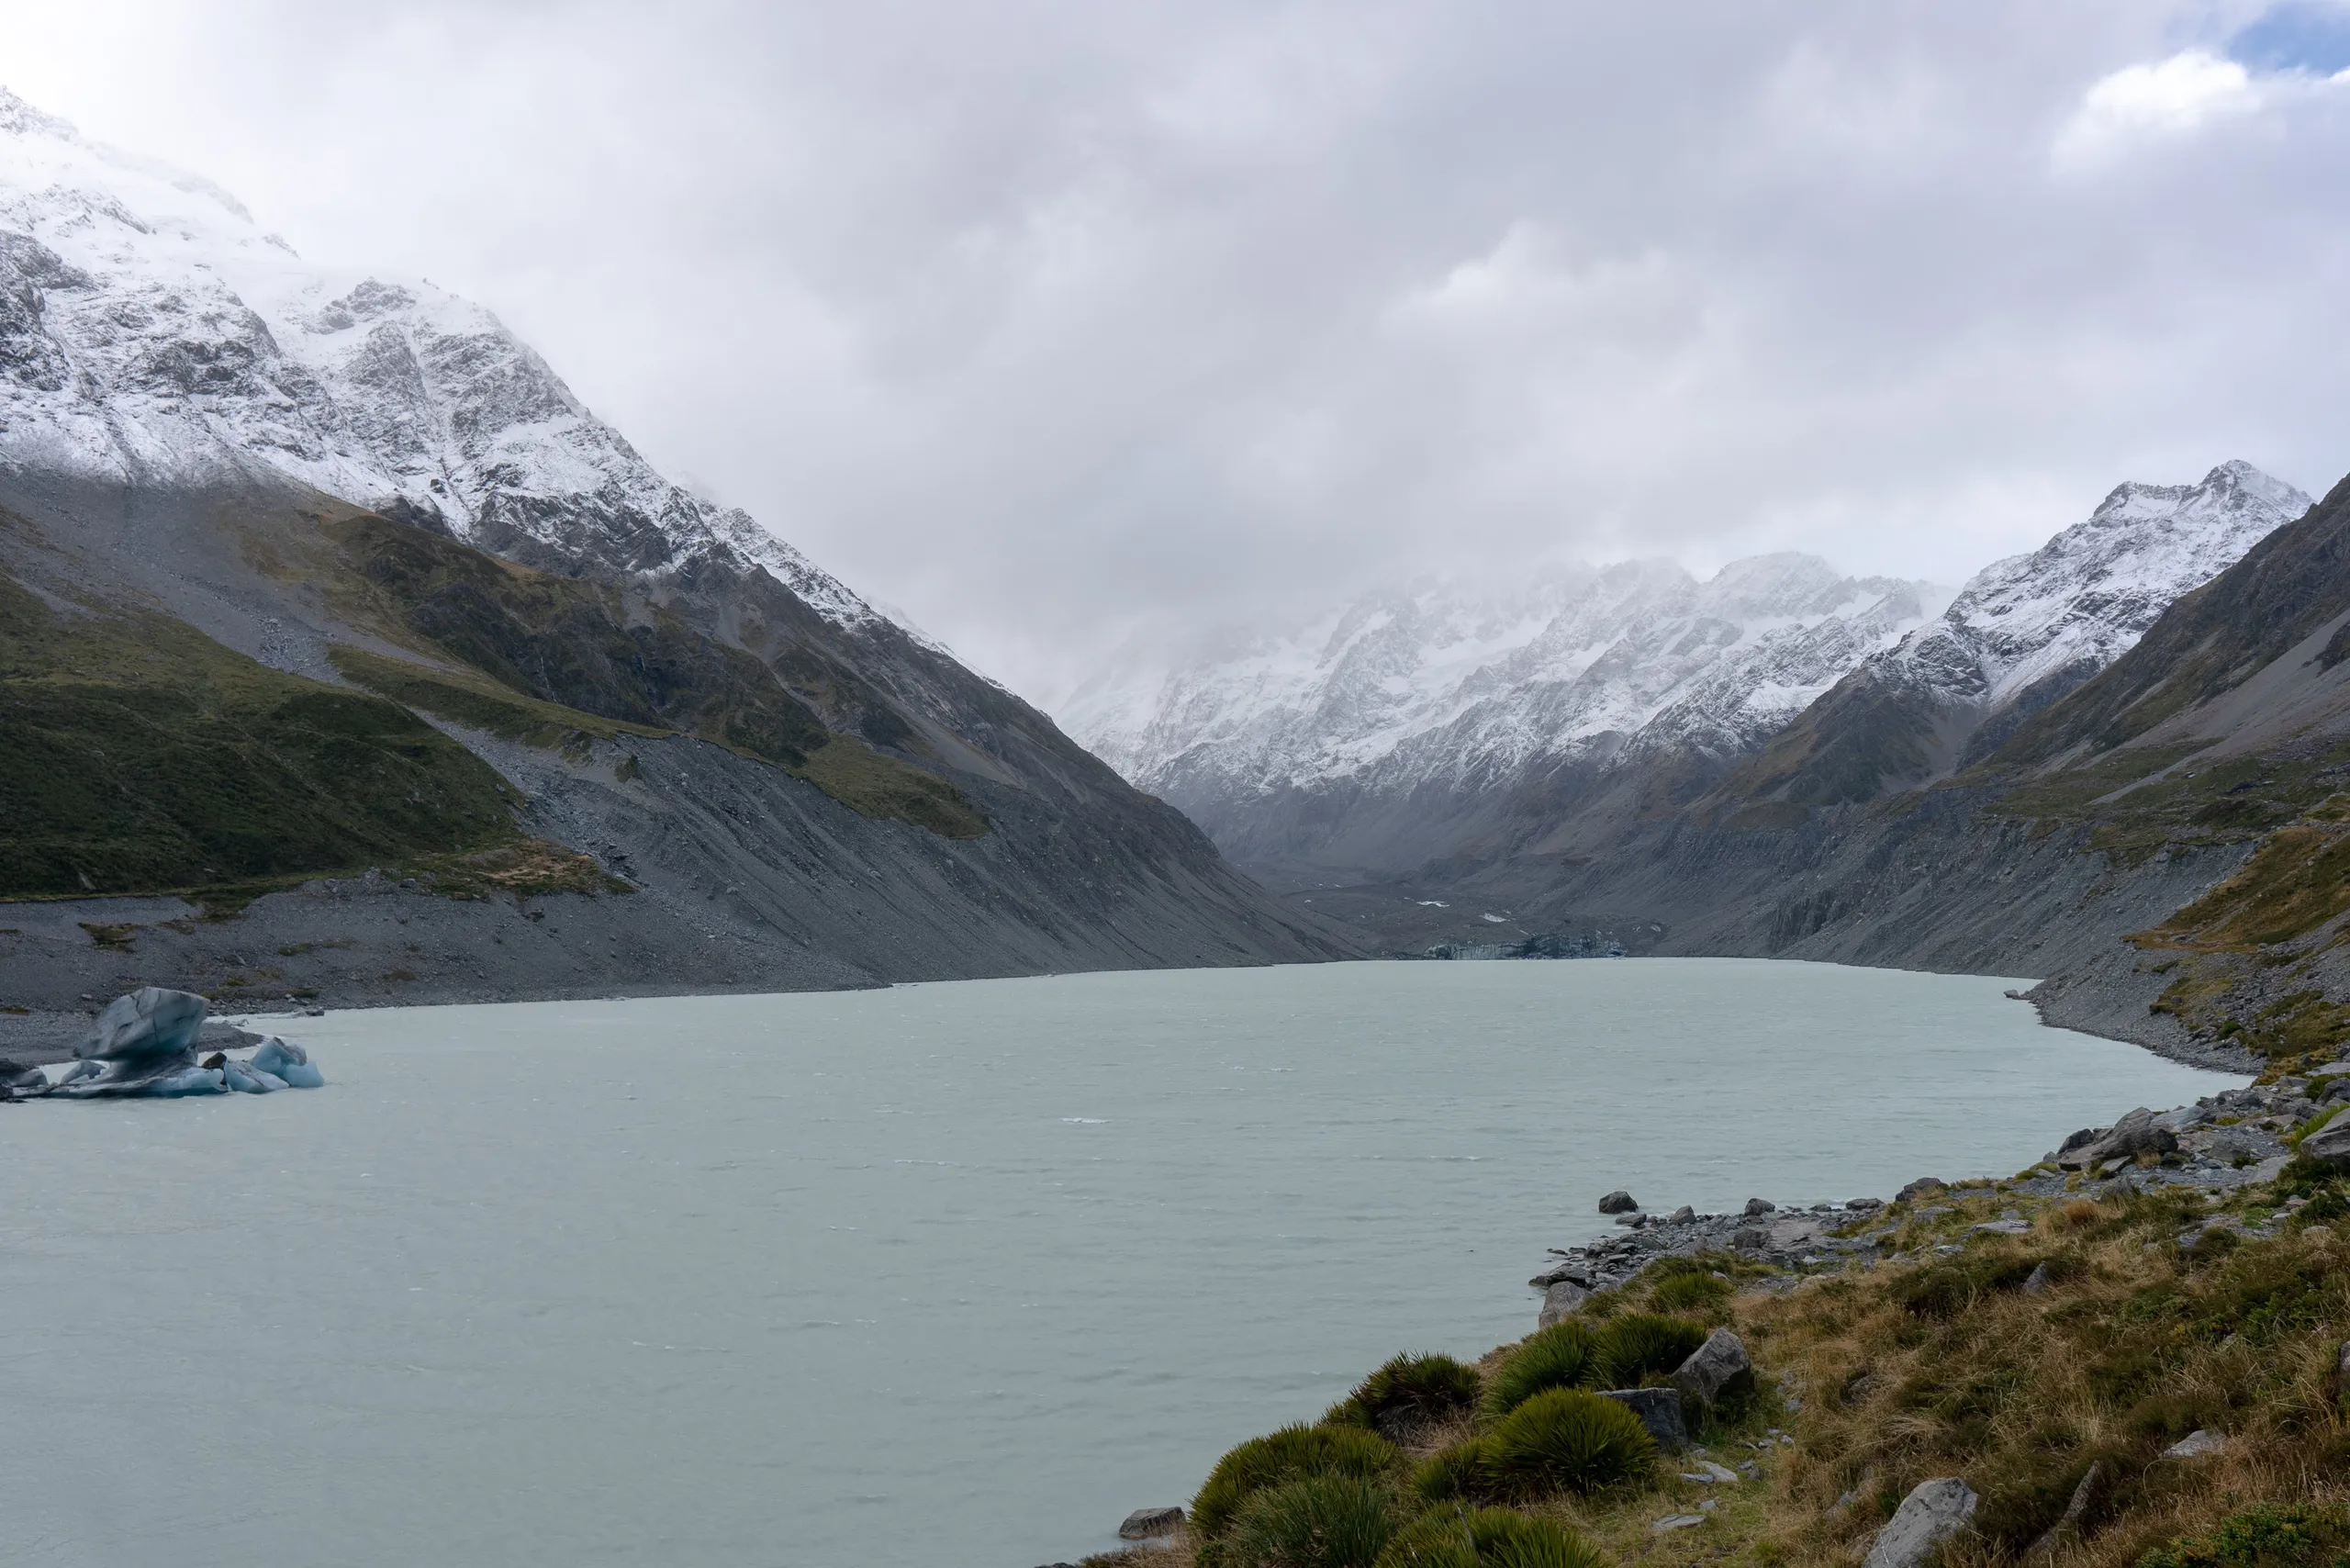 The view from the end of the track. Aoraki was frustratingly obscured by cloud most of the time we were there; I'm told this is quite typical.